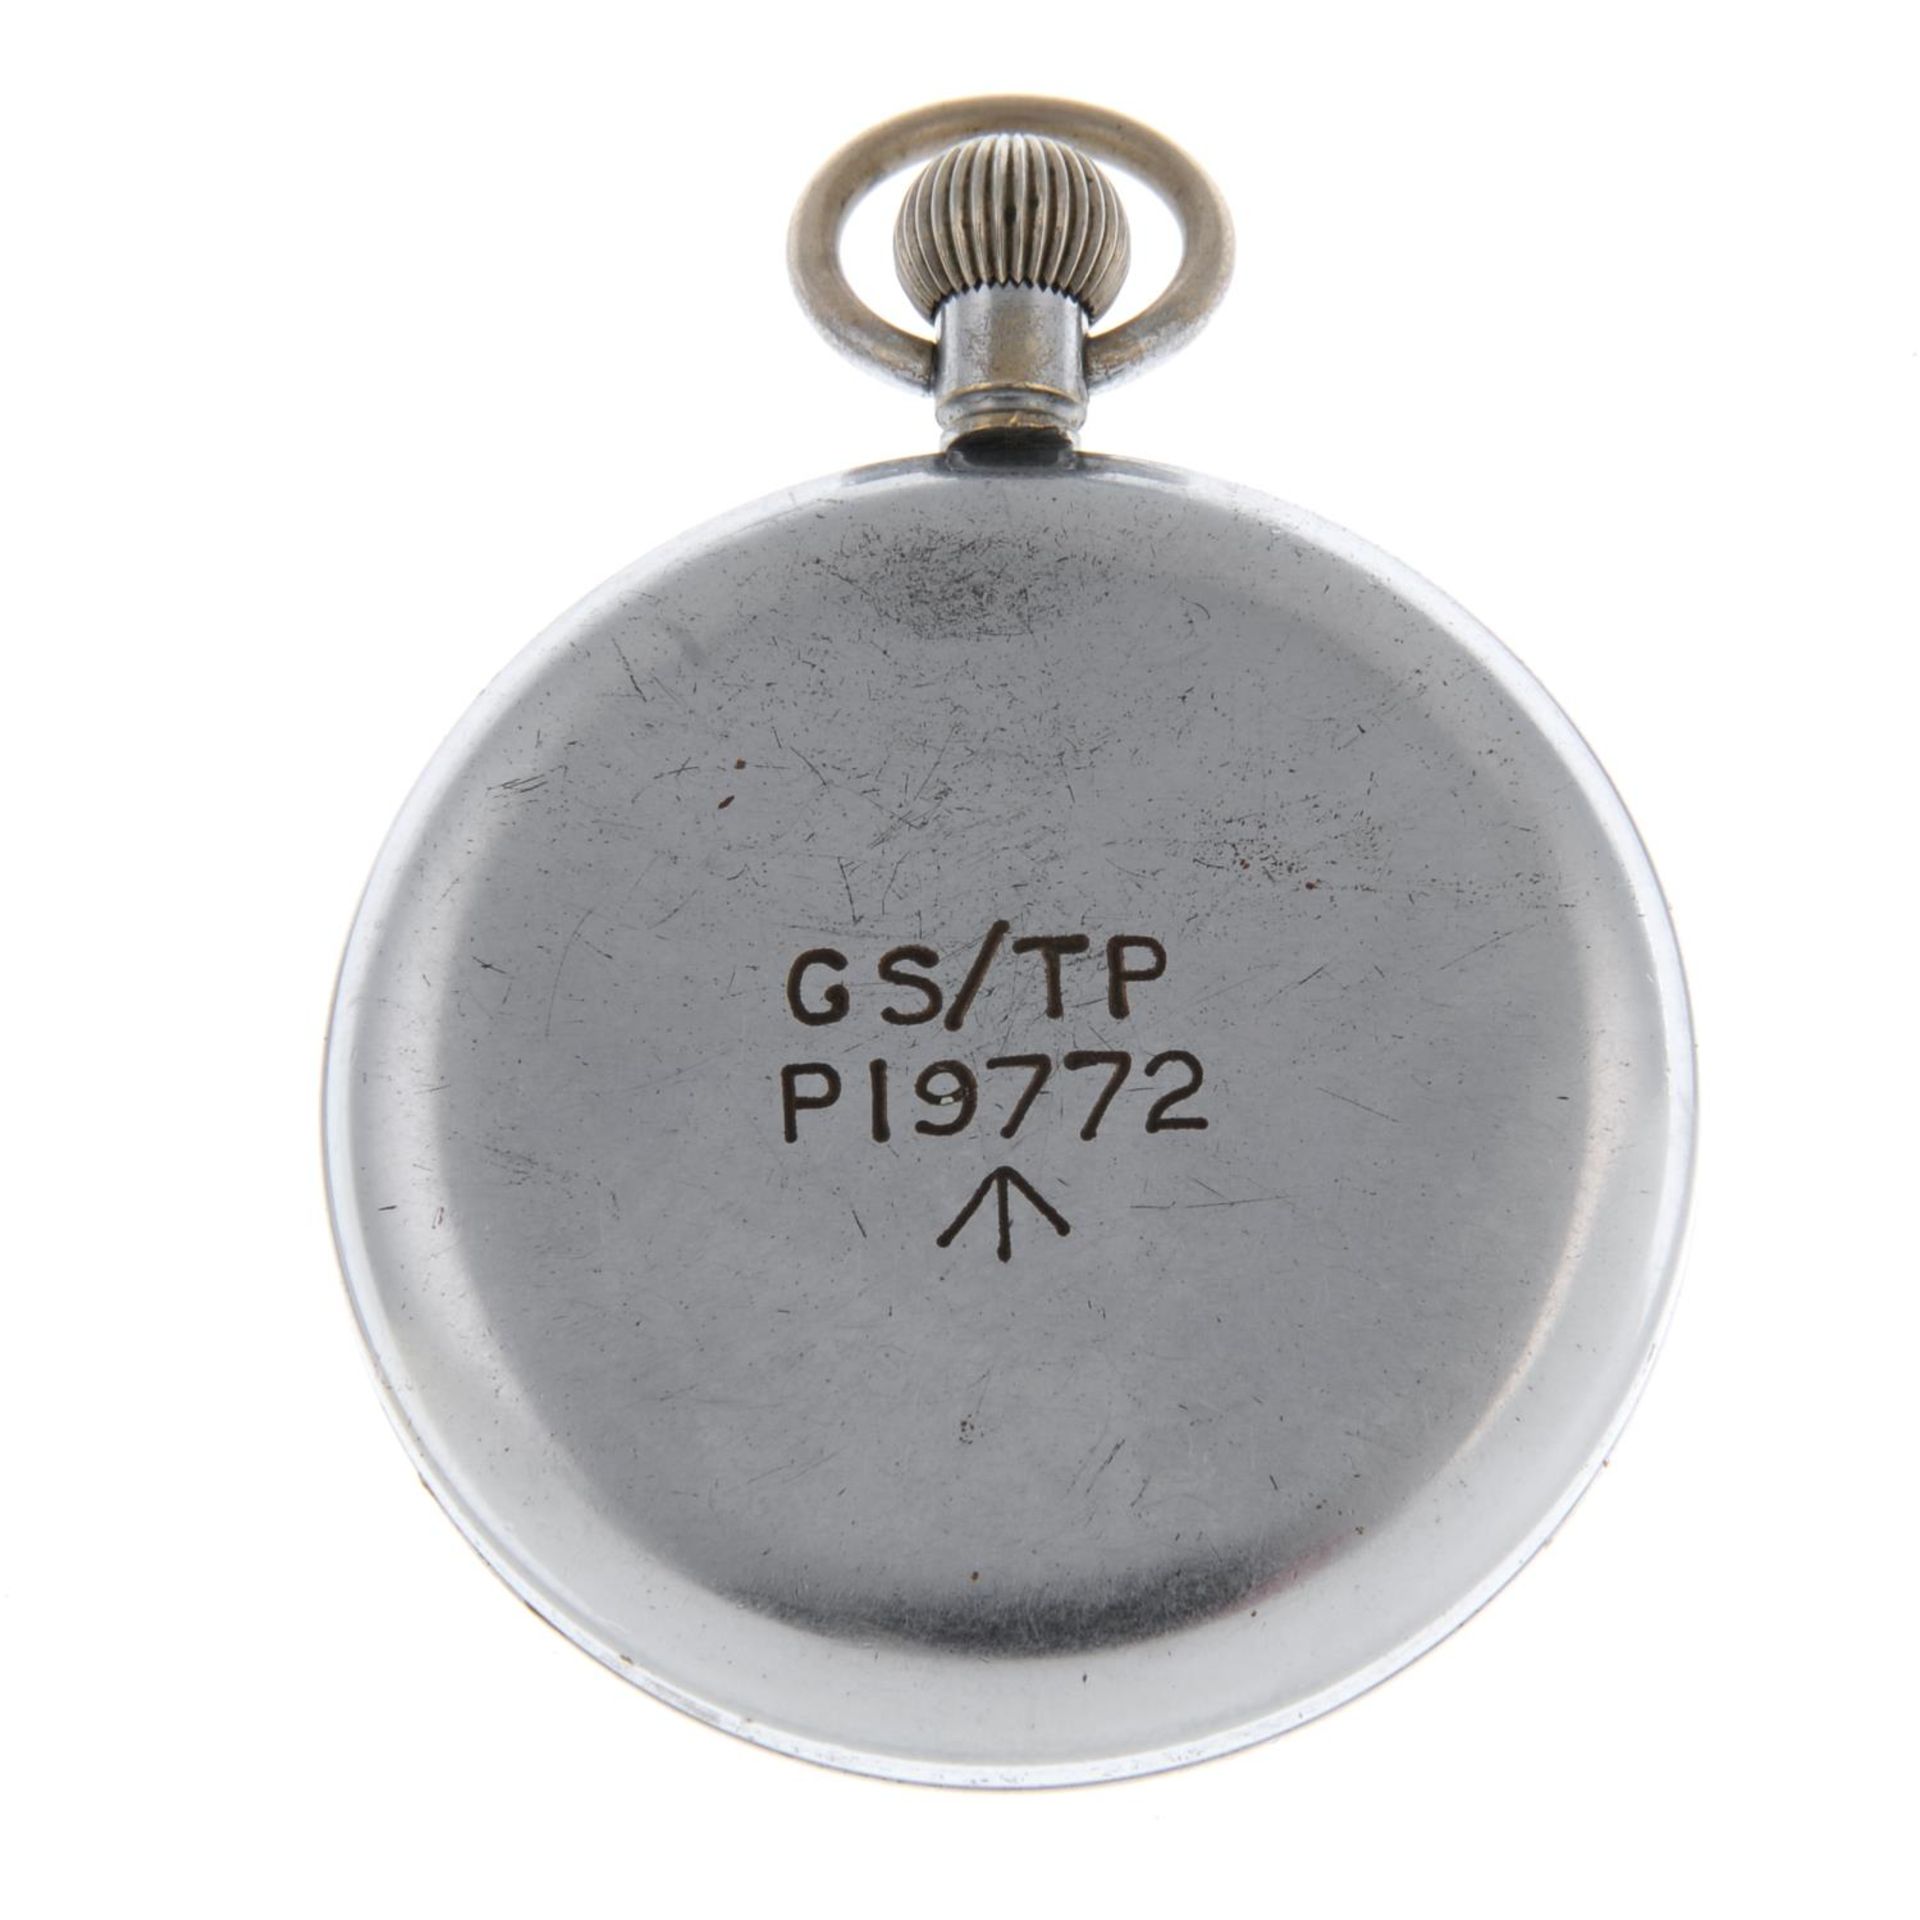 An open face military issue pocket watch by Helvetia. - Image 2 of 2